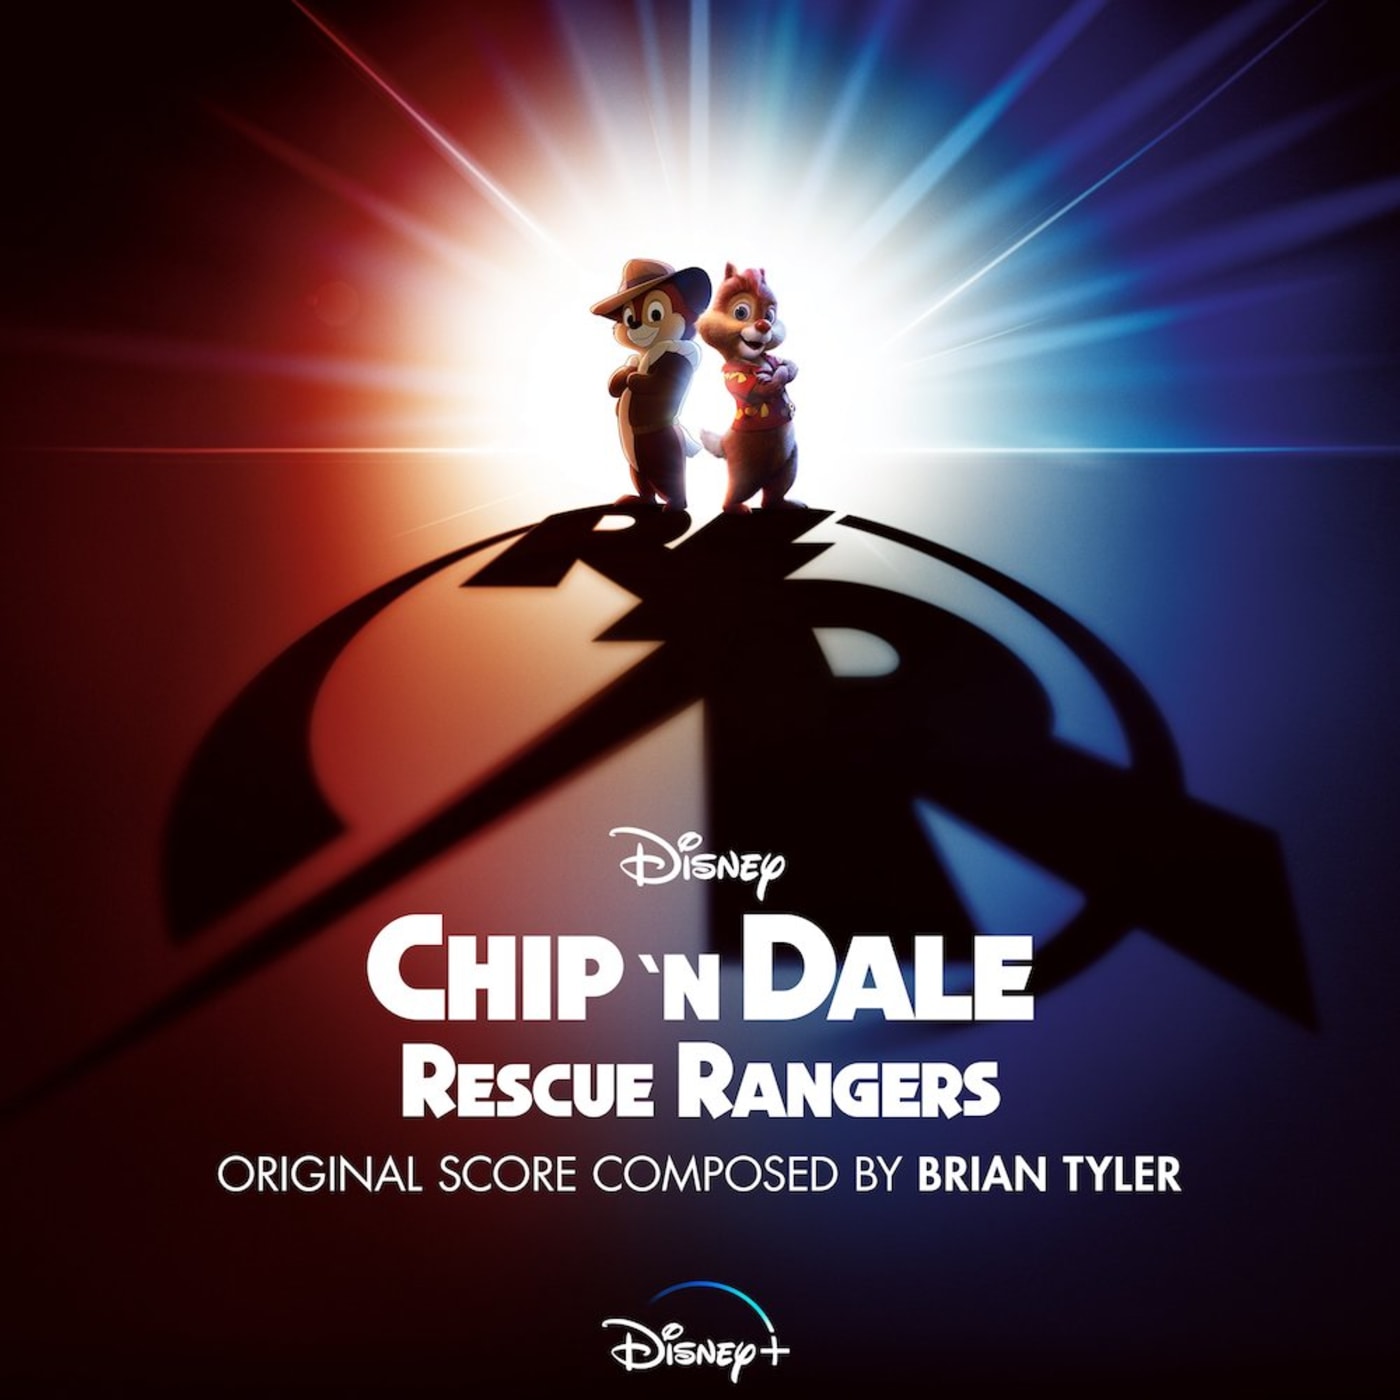 The cover art to the 'Chip 'N Dale' sountrack featuring Post Malone